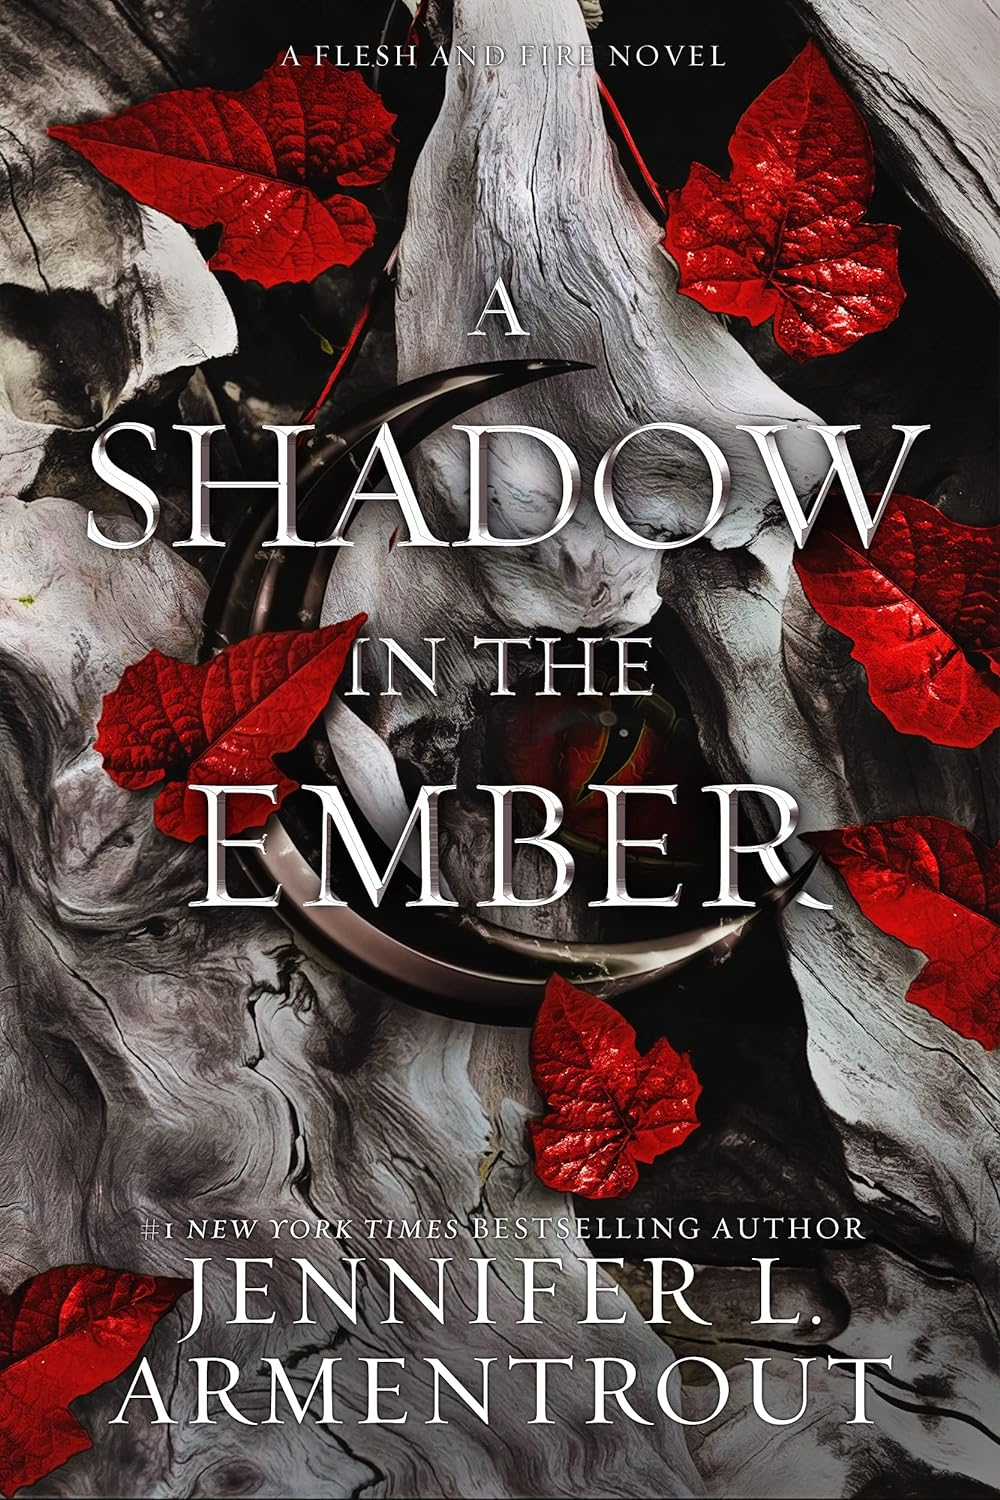 Amazon.com: A Shadow in the Ember (Flesh and Fire Book 1) eBook : Armentrout, Jennifer L. : Kindle Store $1.99